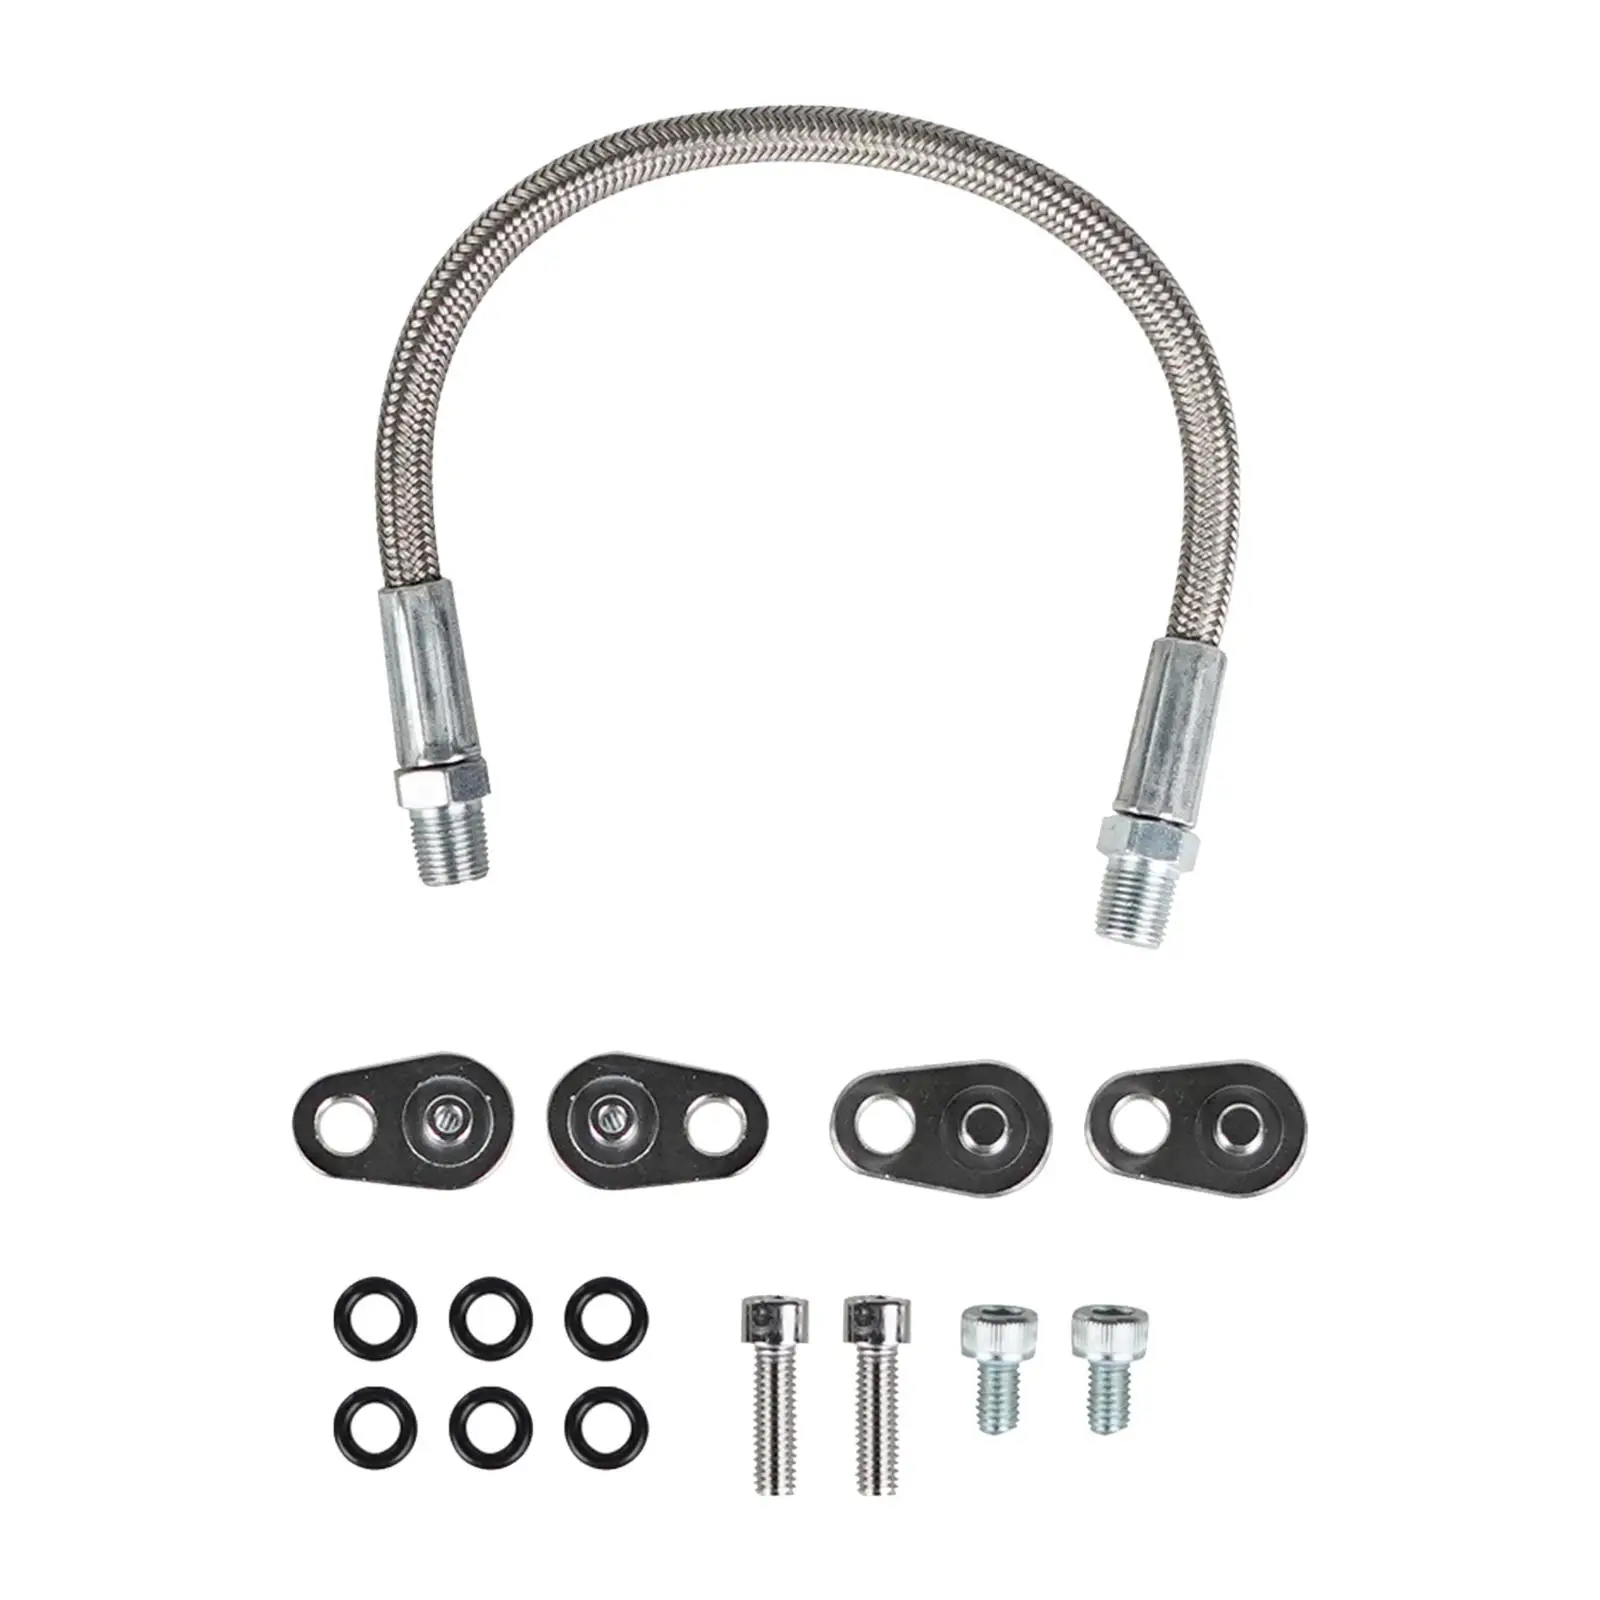 Coolant Crossover Direct Replace Aluminum Alloy Easy Installation Steam Port Kits Braided Hose Kit for GM LS Series Engines